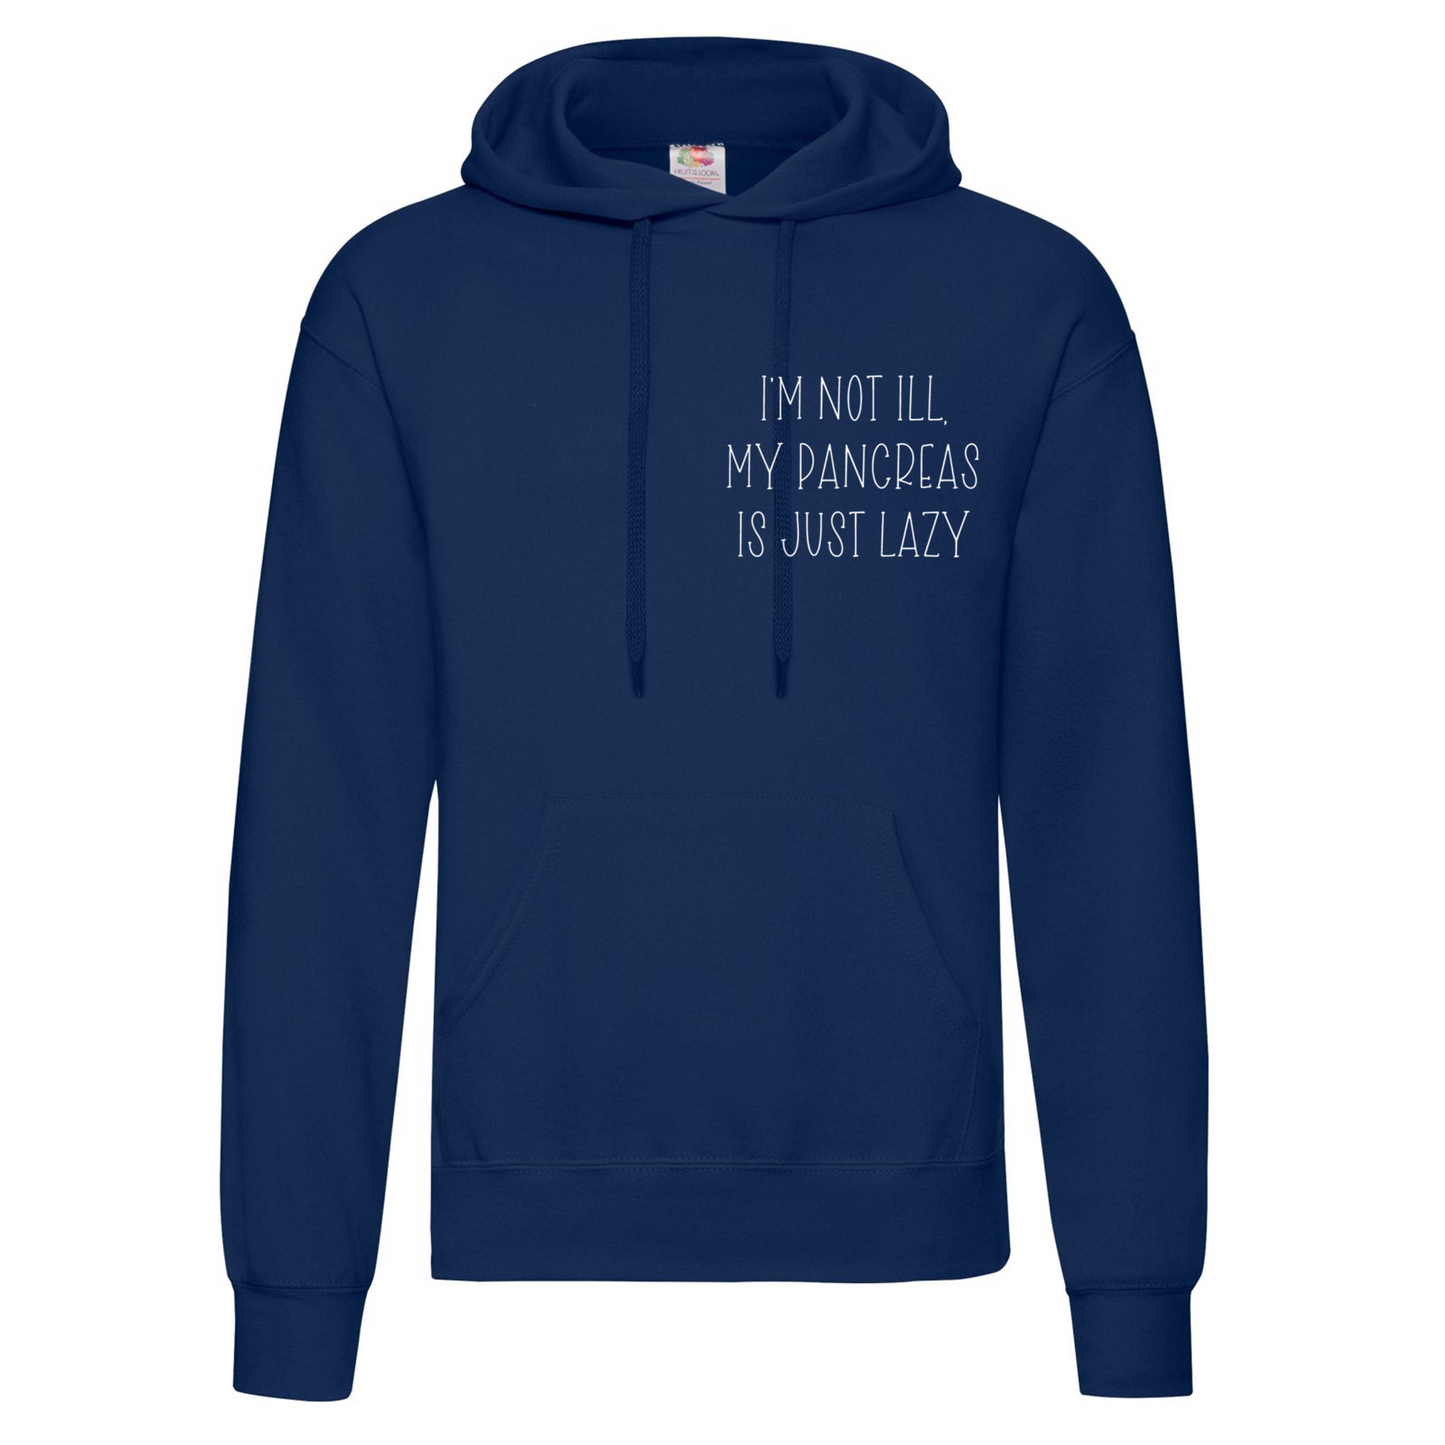 I'm Not Ill, My Pancreas Is Just Lazy Kids Hoodie